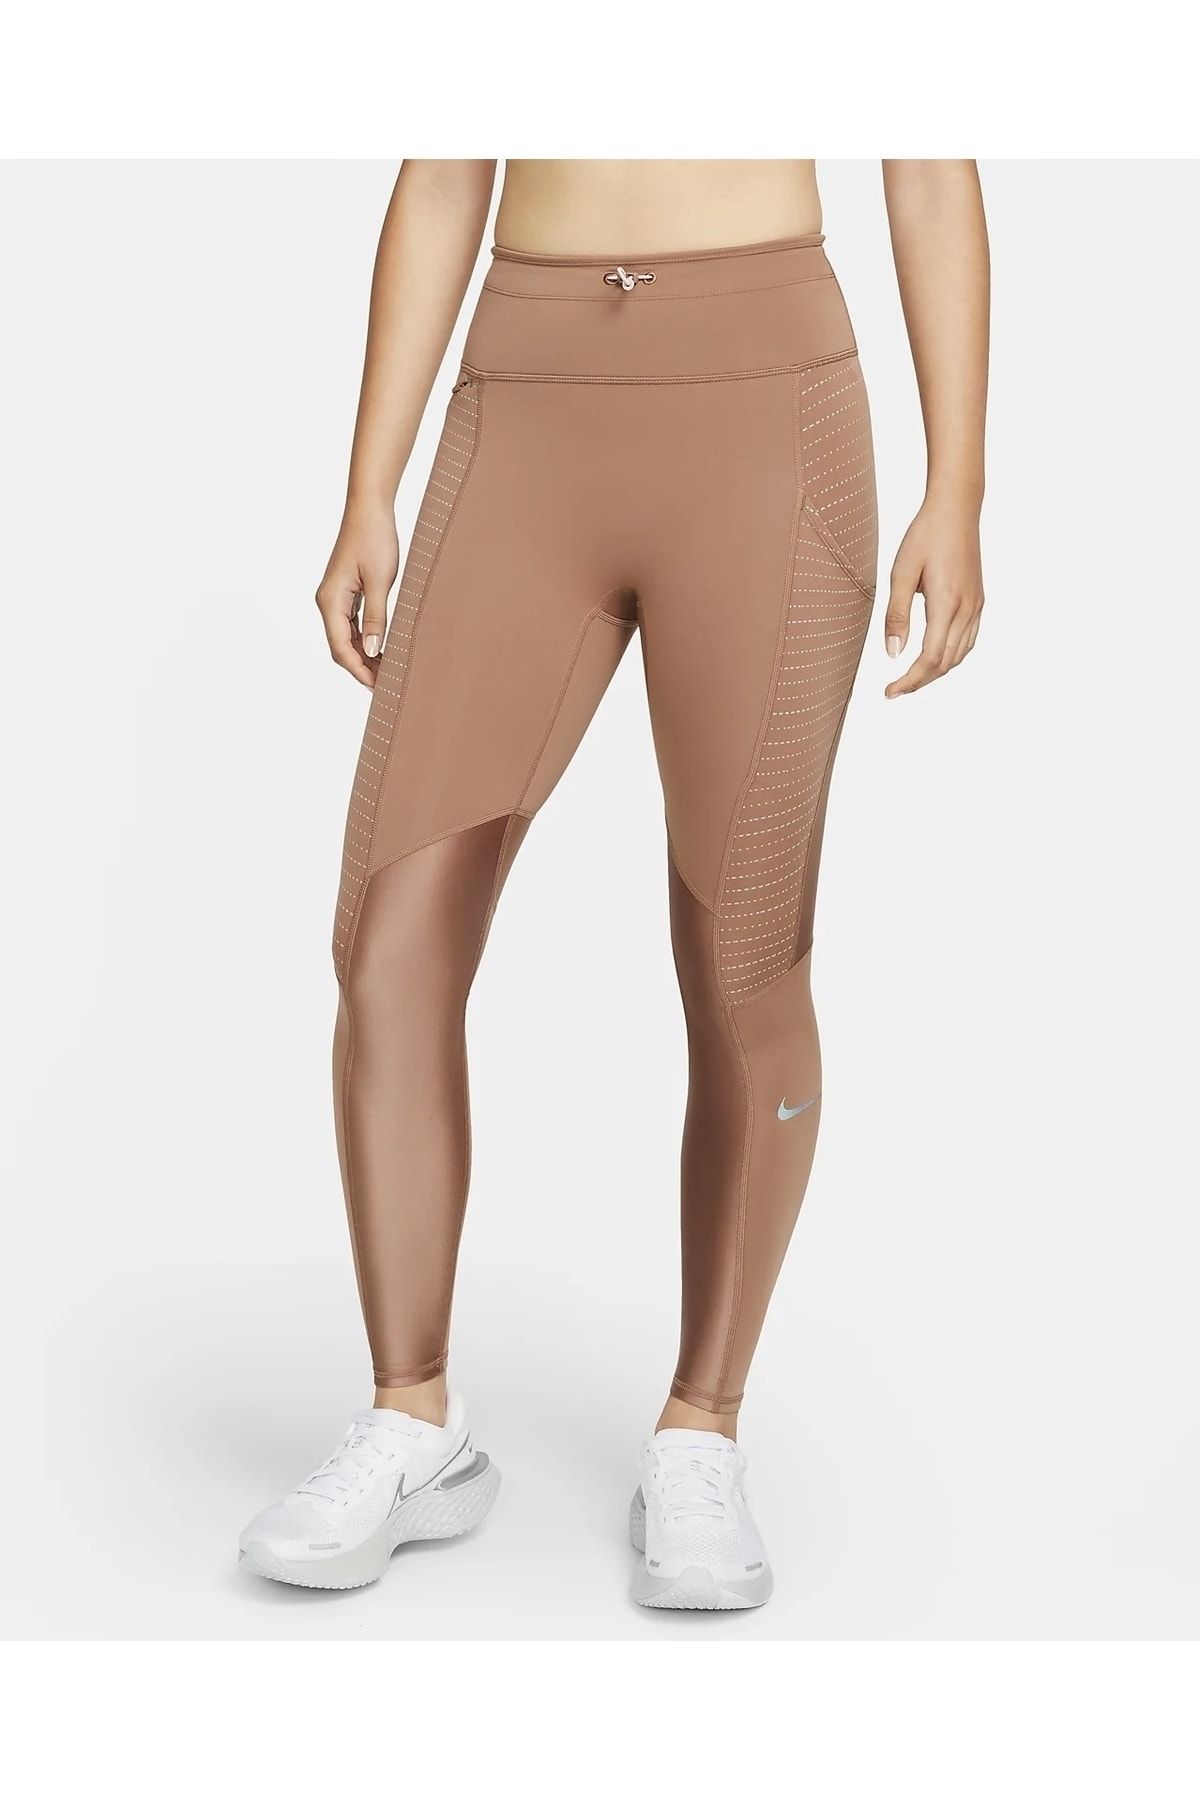 Nike Dri-FIT Run Division Epic Luxe Women's Brown Tights - Trendyol